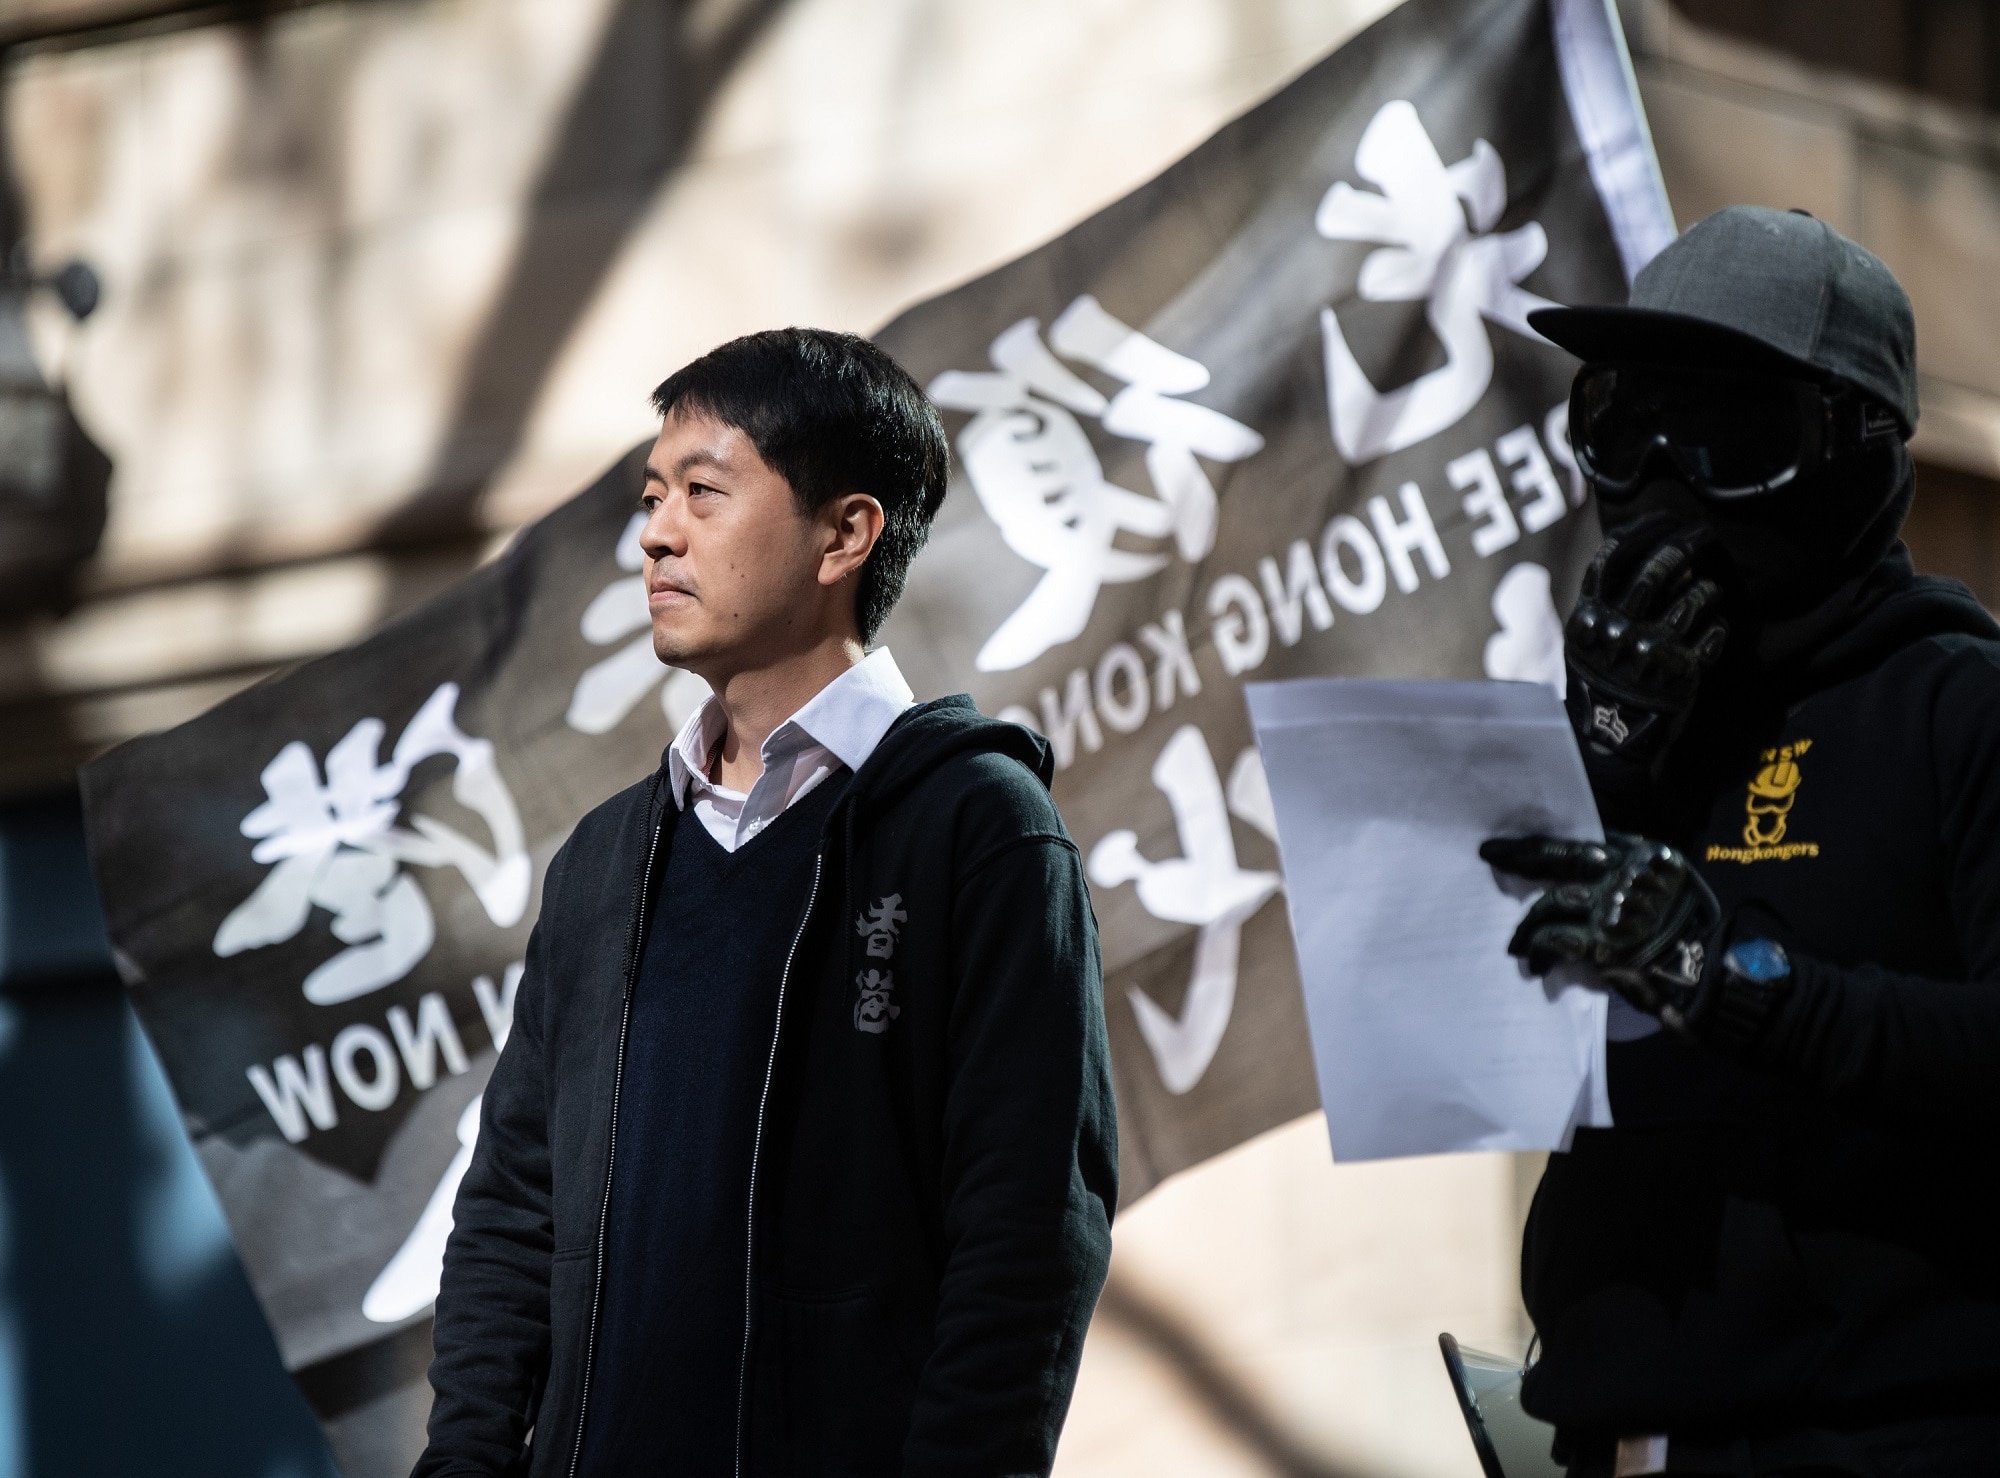 Former Hong Kong Politician Ted Hui speaking during the rally in Sydney.